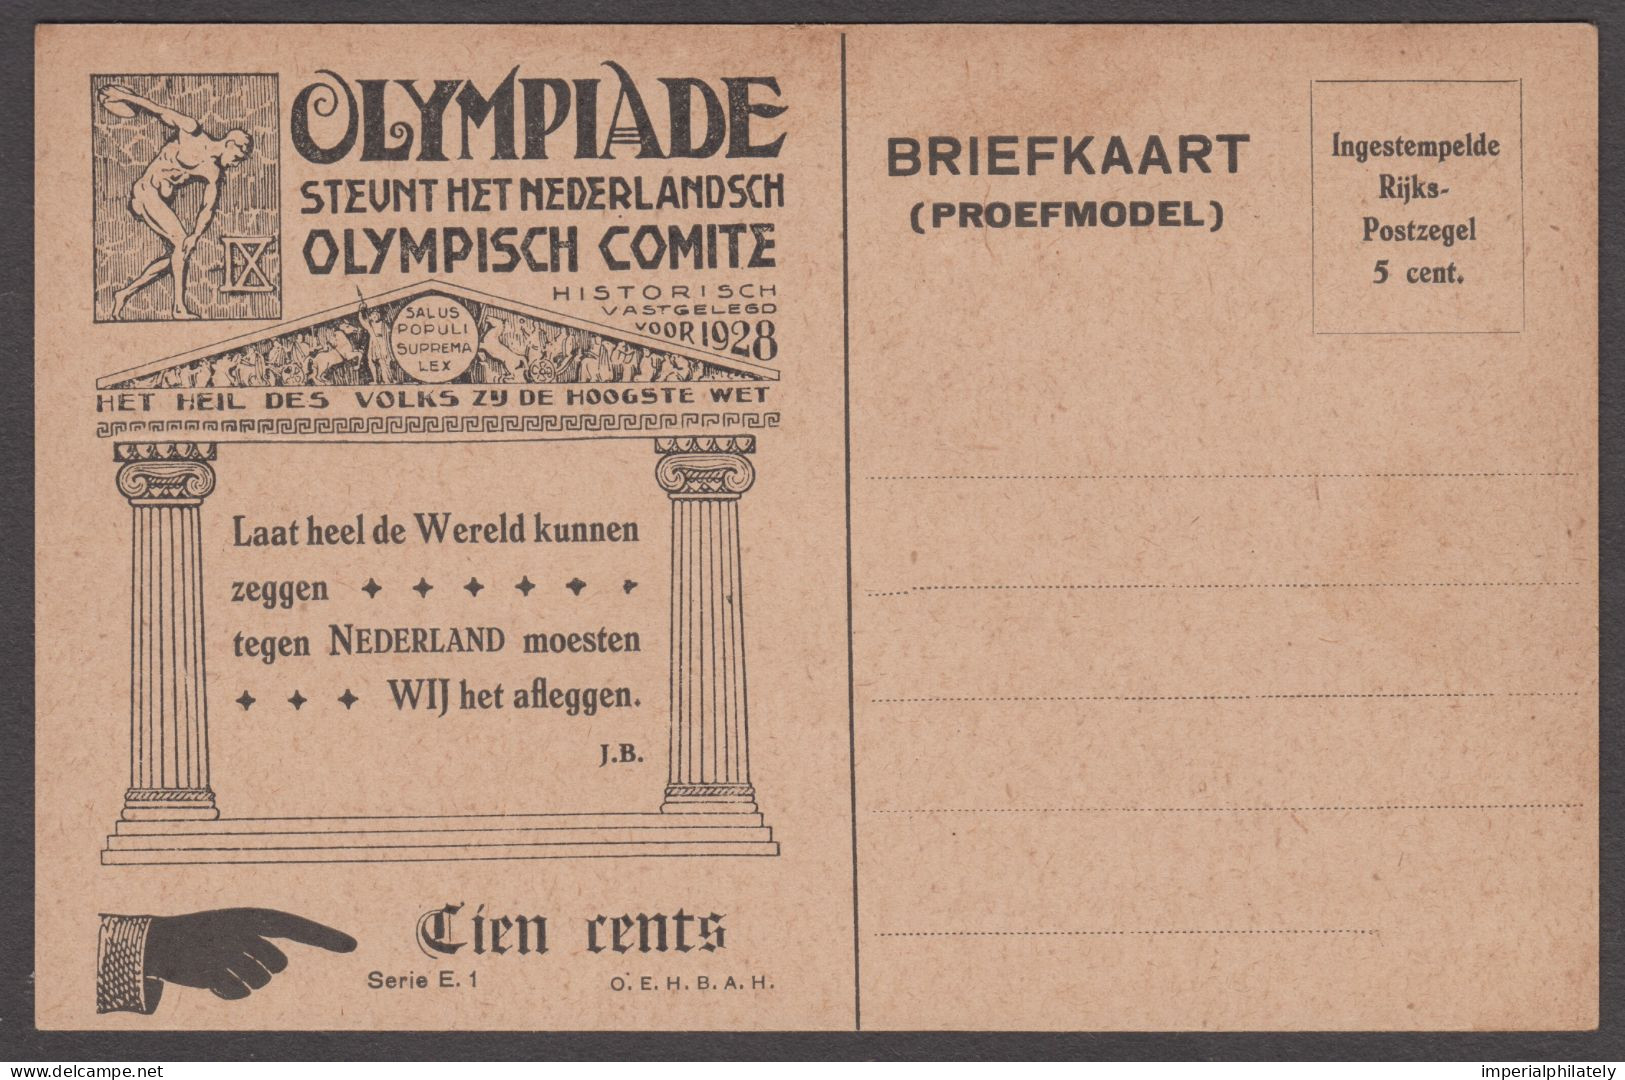 1928 Amsterdam 5c Postal Stationery Card Proof ("proefmodel") By Huygens, Series E.1 - Zomer 1928: Amsterdam